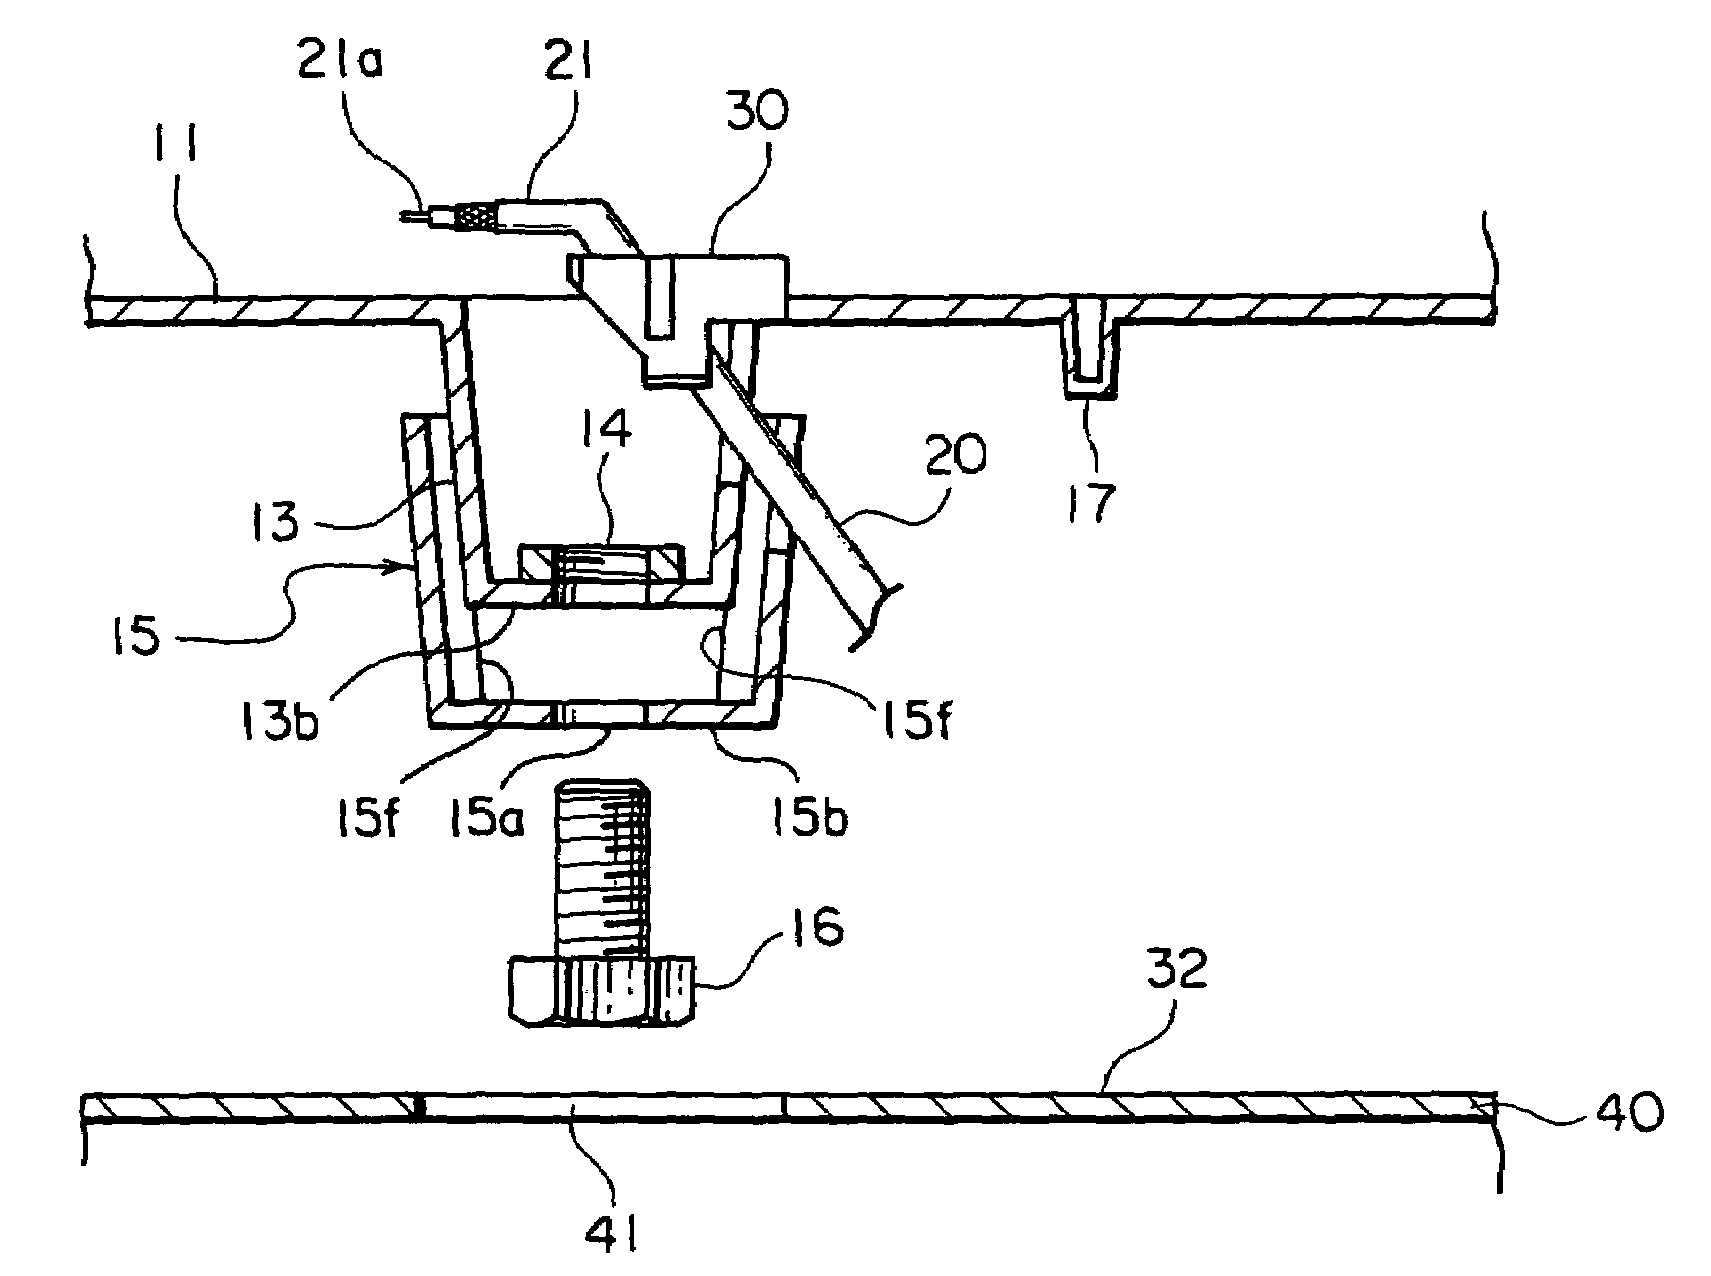 Fixing device for fixing an object to a fixing plate and antenna apparatus using the fixing device